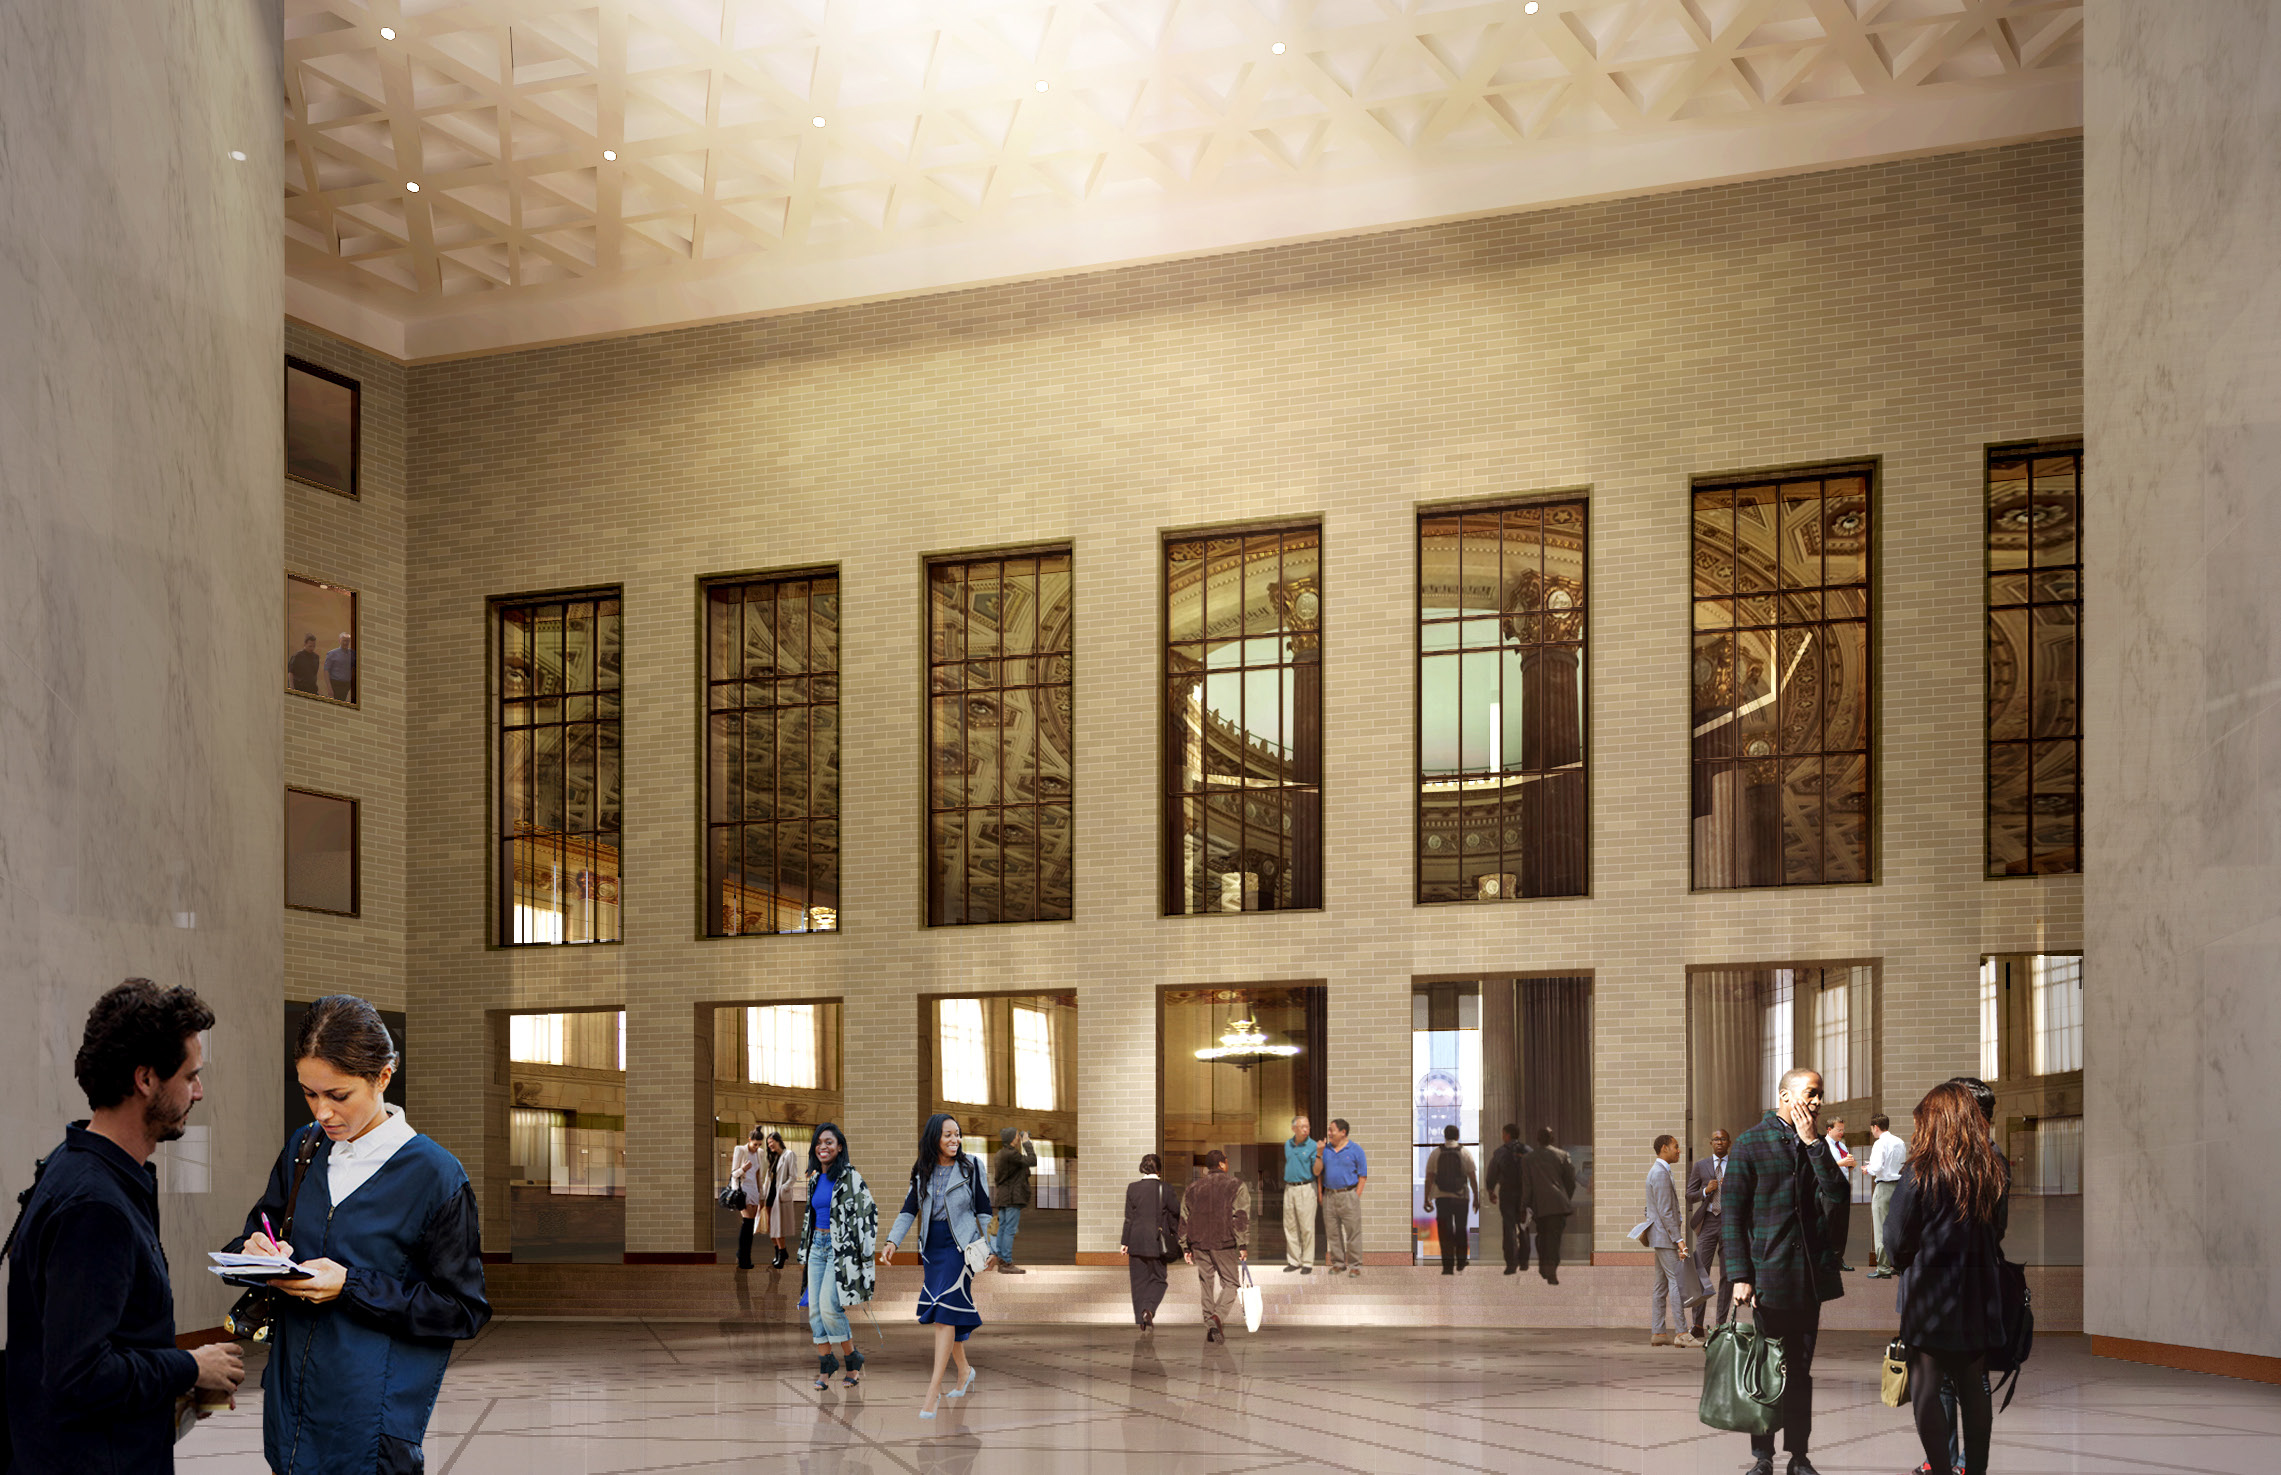 Rendering of the former Dime Savings Bank at 9 DeKalb Avenue as seen from the atrium at 340 Flatbush Avenue Extension. Credit: SHoP